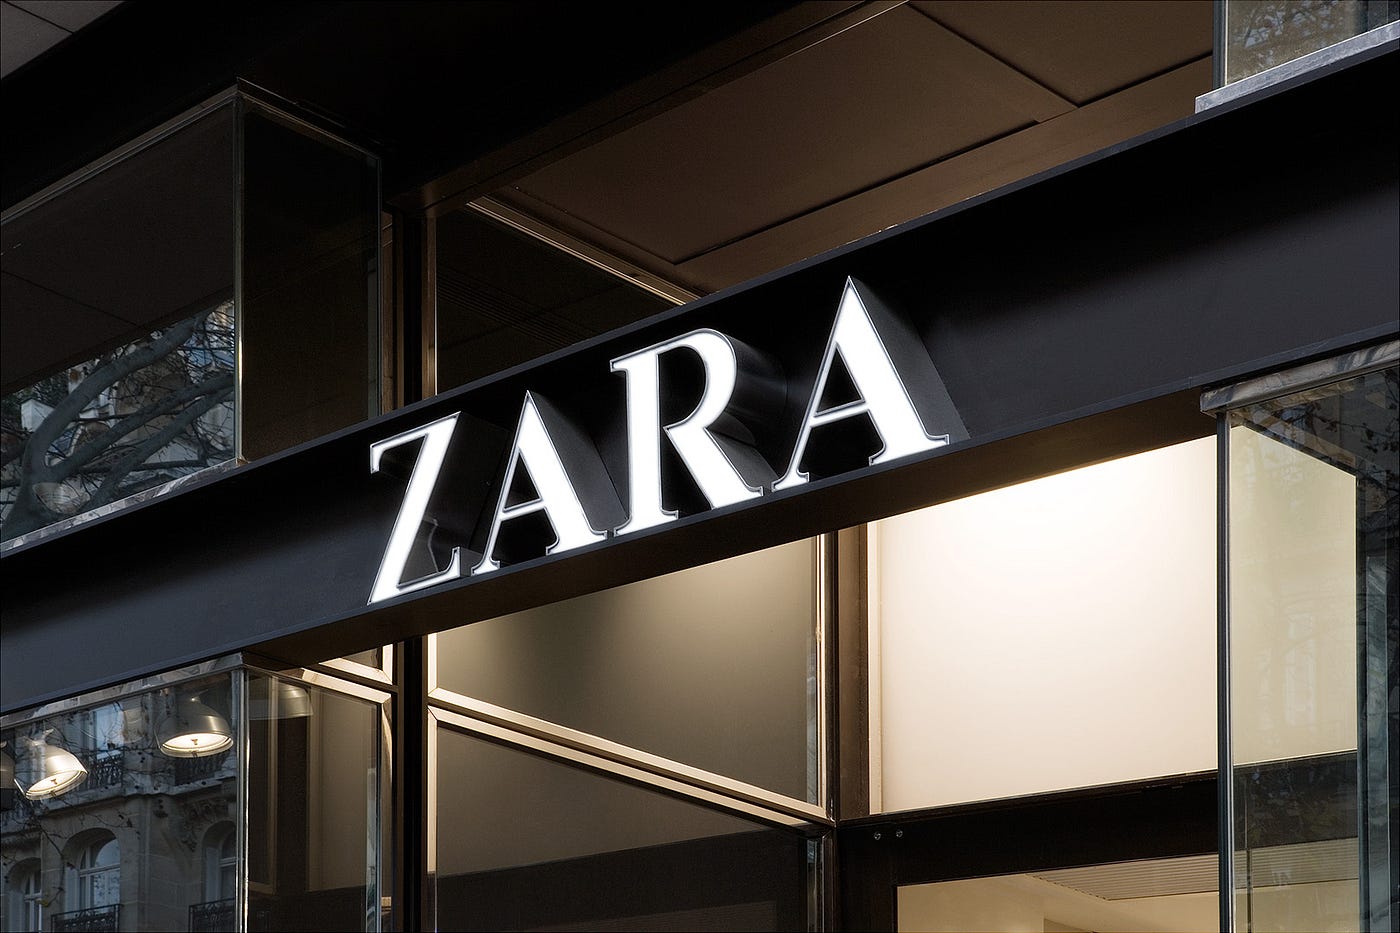 Zara: Proof of The Power of An Efficient Supply Chain, by Renato Zapata IV